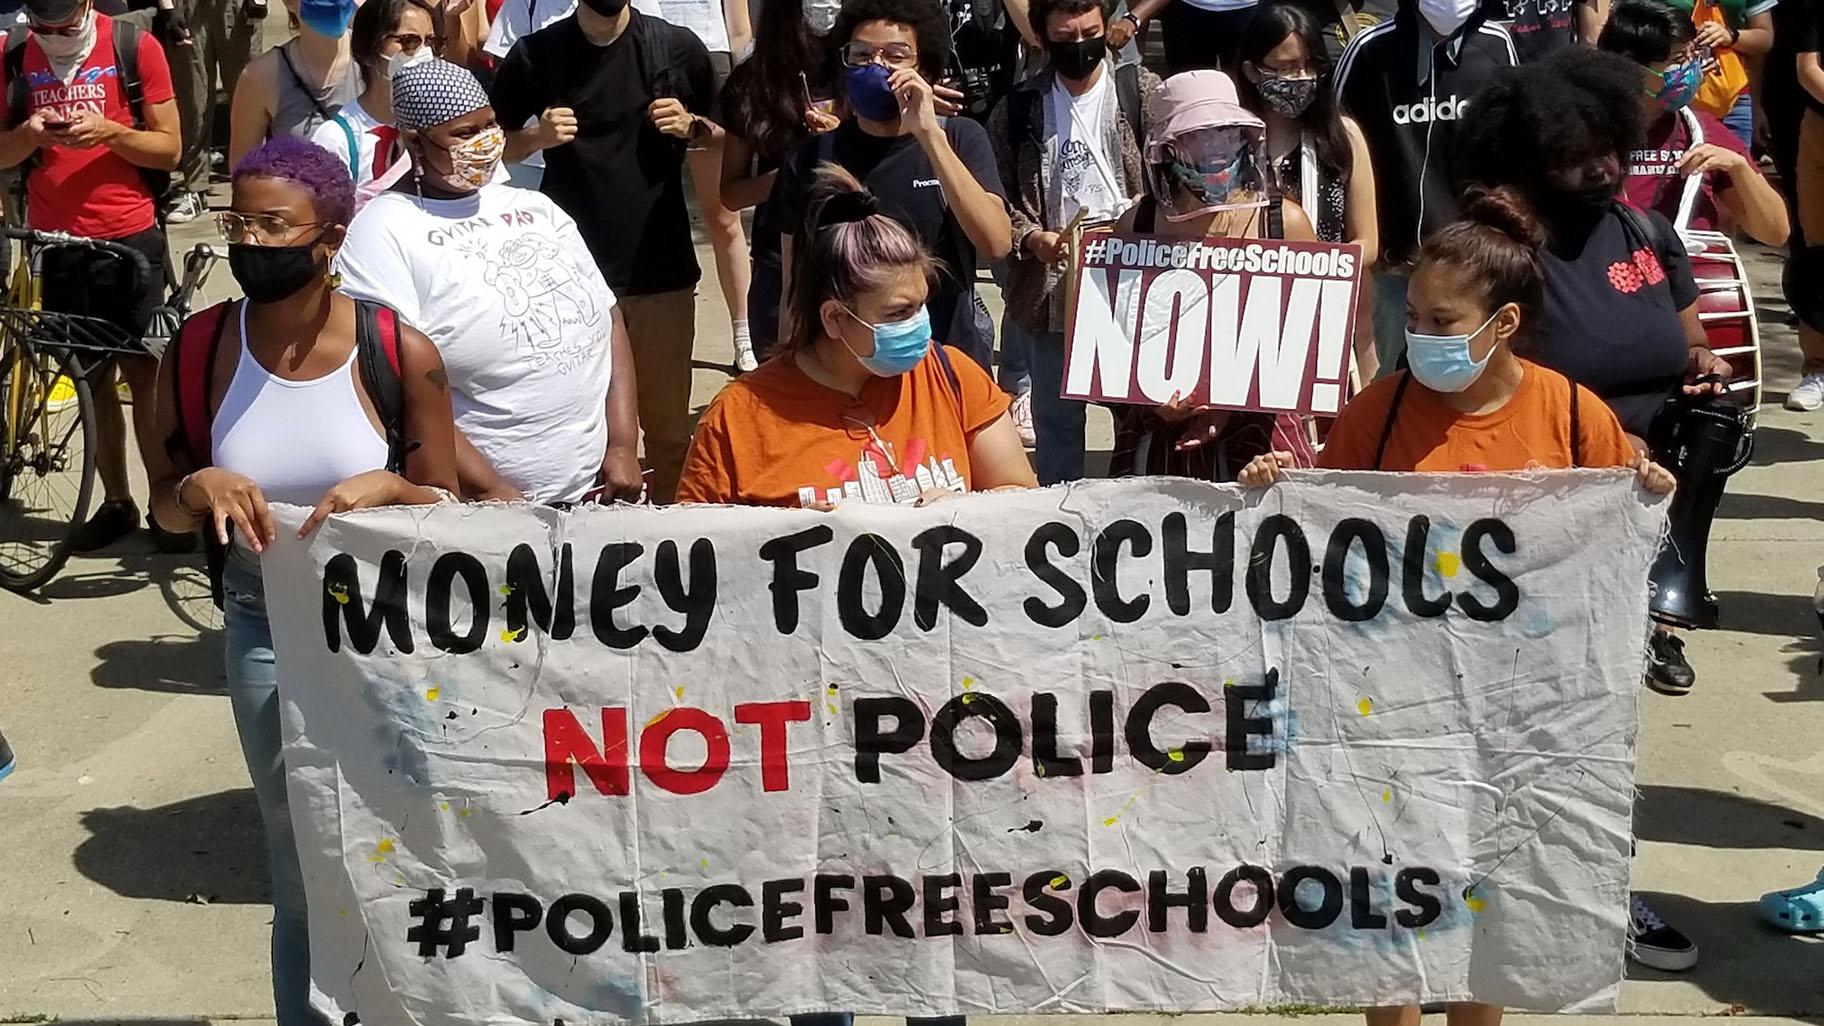 Youth activists organized a peaceful march to then-Mayor Lori Lightfoot’s home on Aug. 13, 2020, to demand the removal of resource officers from Chicago Public Schools. (Matt Masterson / WTTW News)